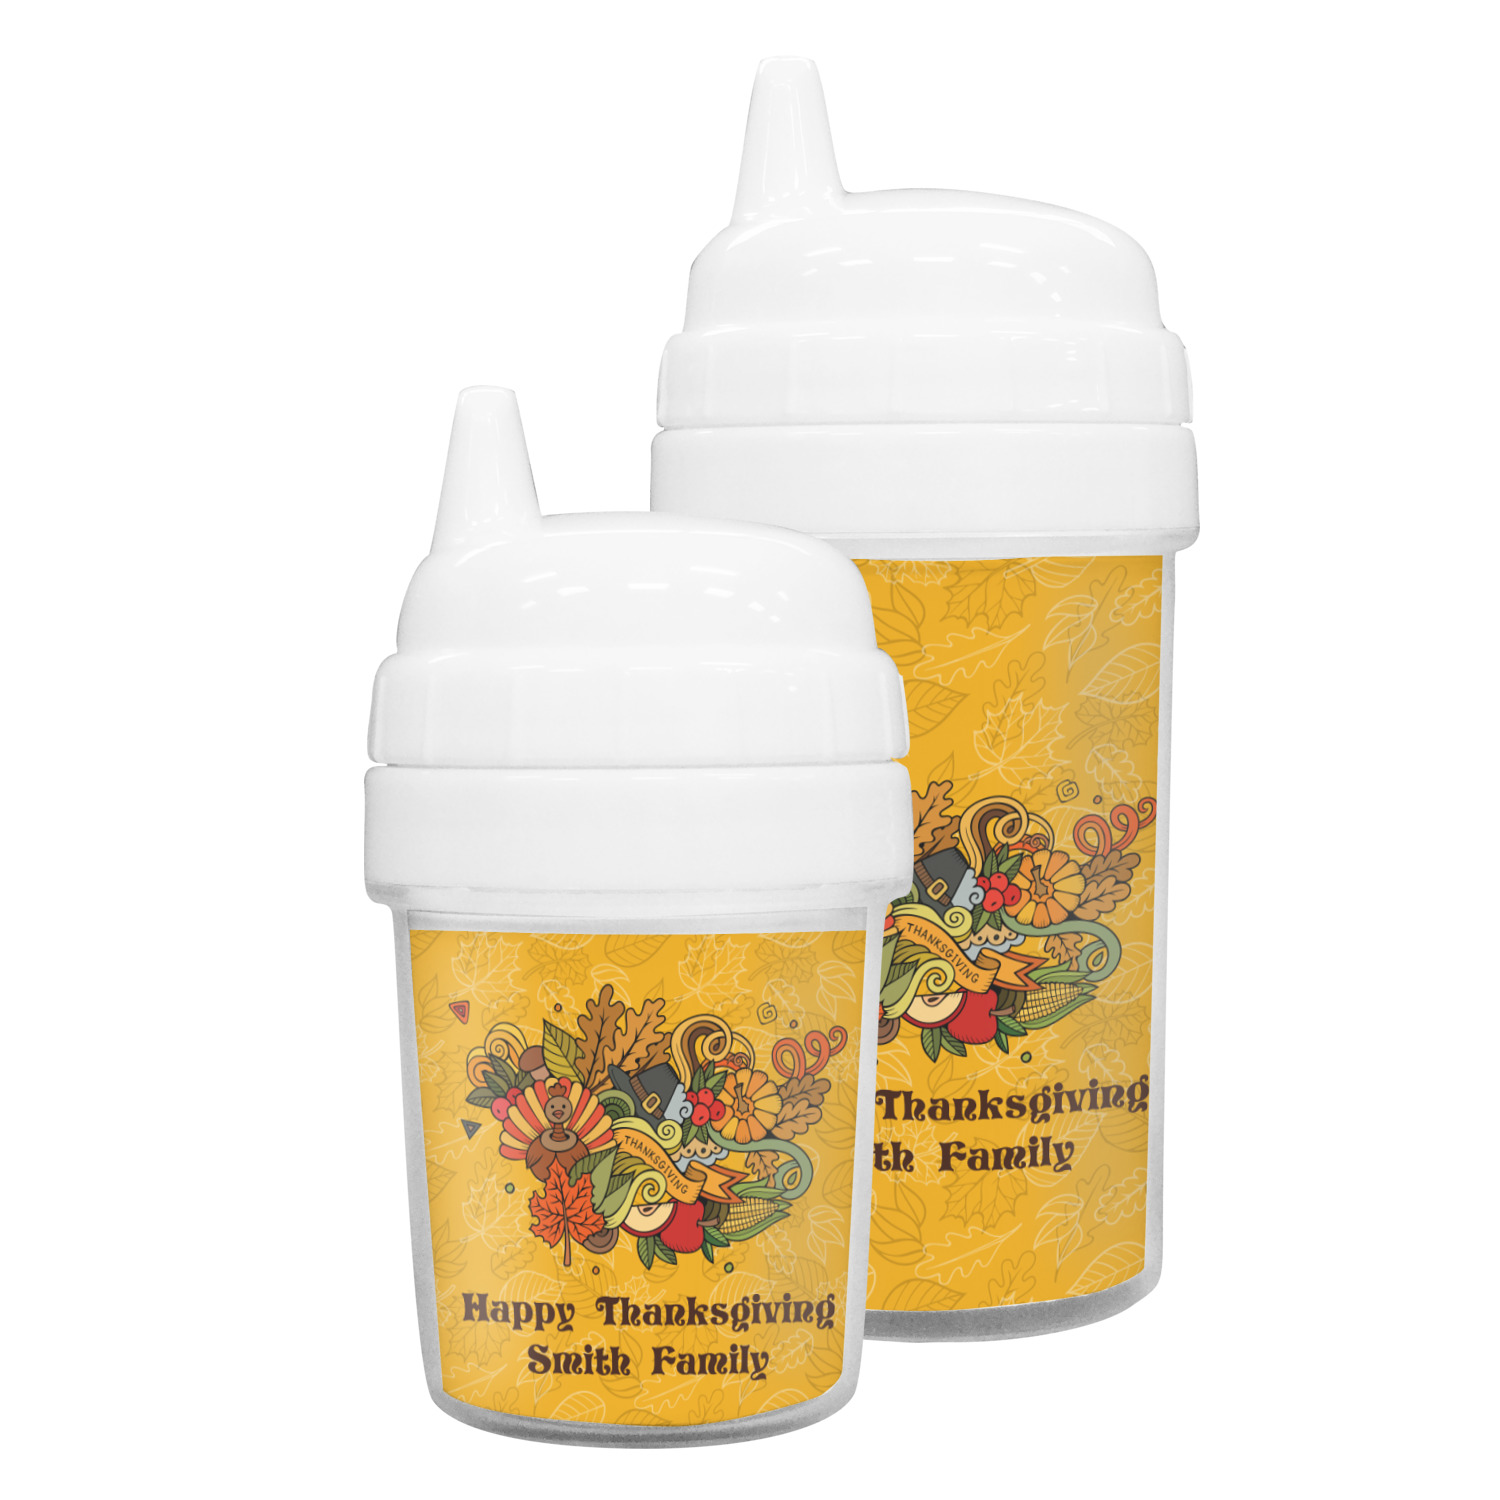 https://www.youcustomizeit.com/common/MAKE/513845/Happy-Thanksgiving-Sippy-Cups.jpg?lm=1604101671